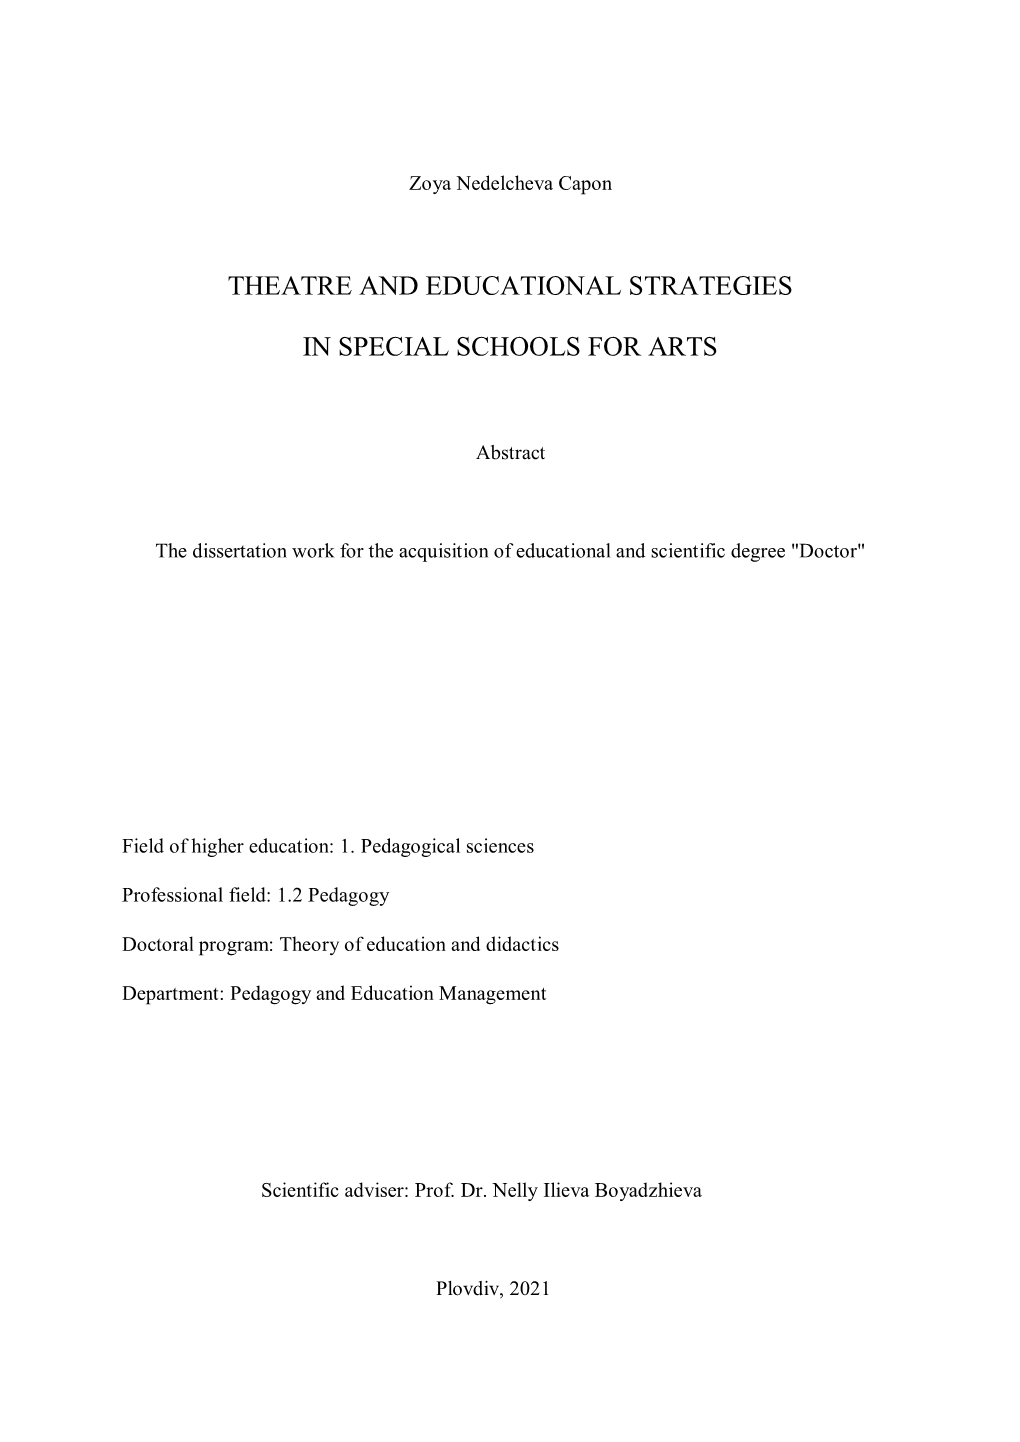 Theatre and Educational Strategies in Special